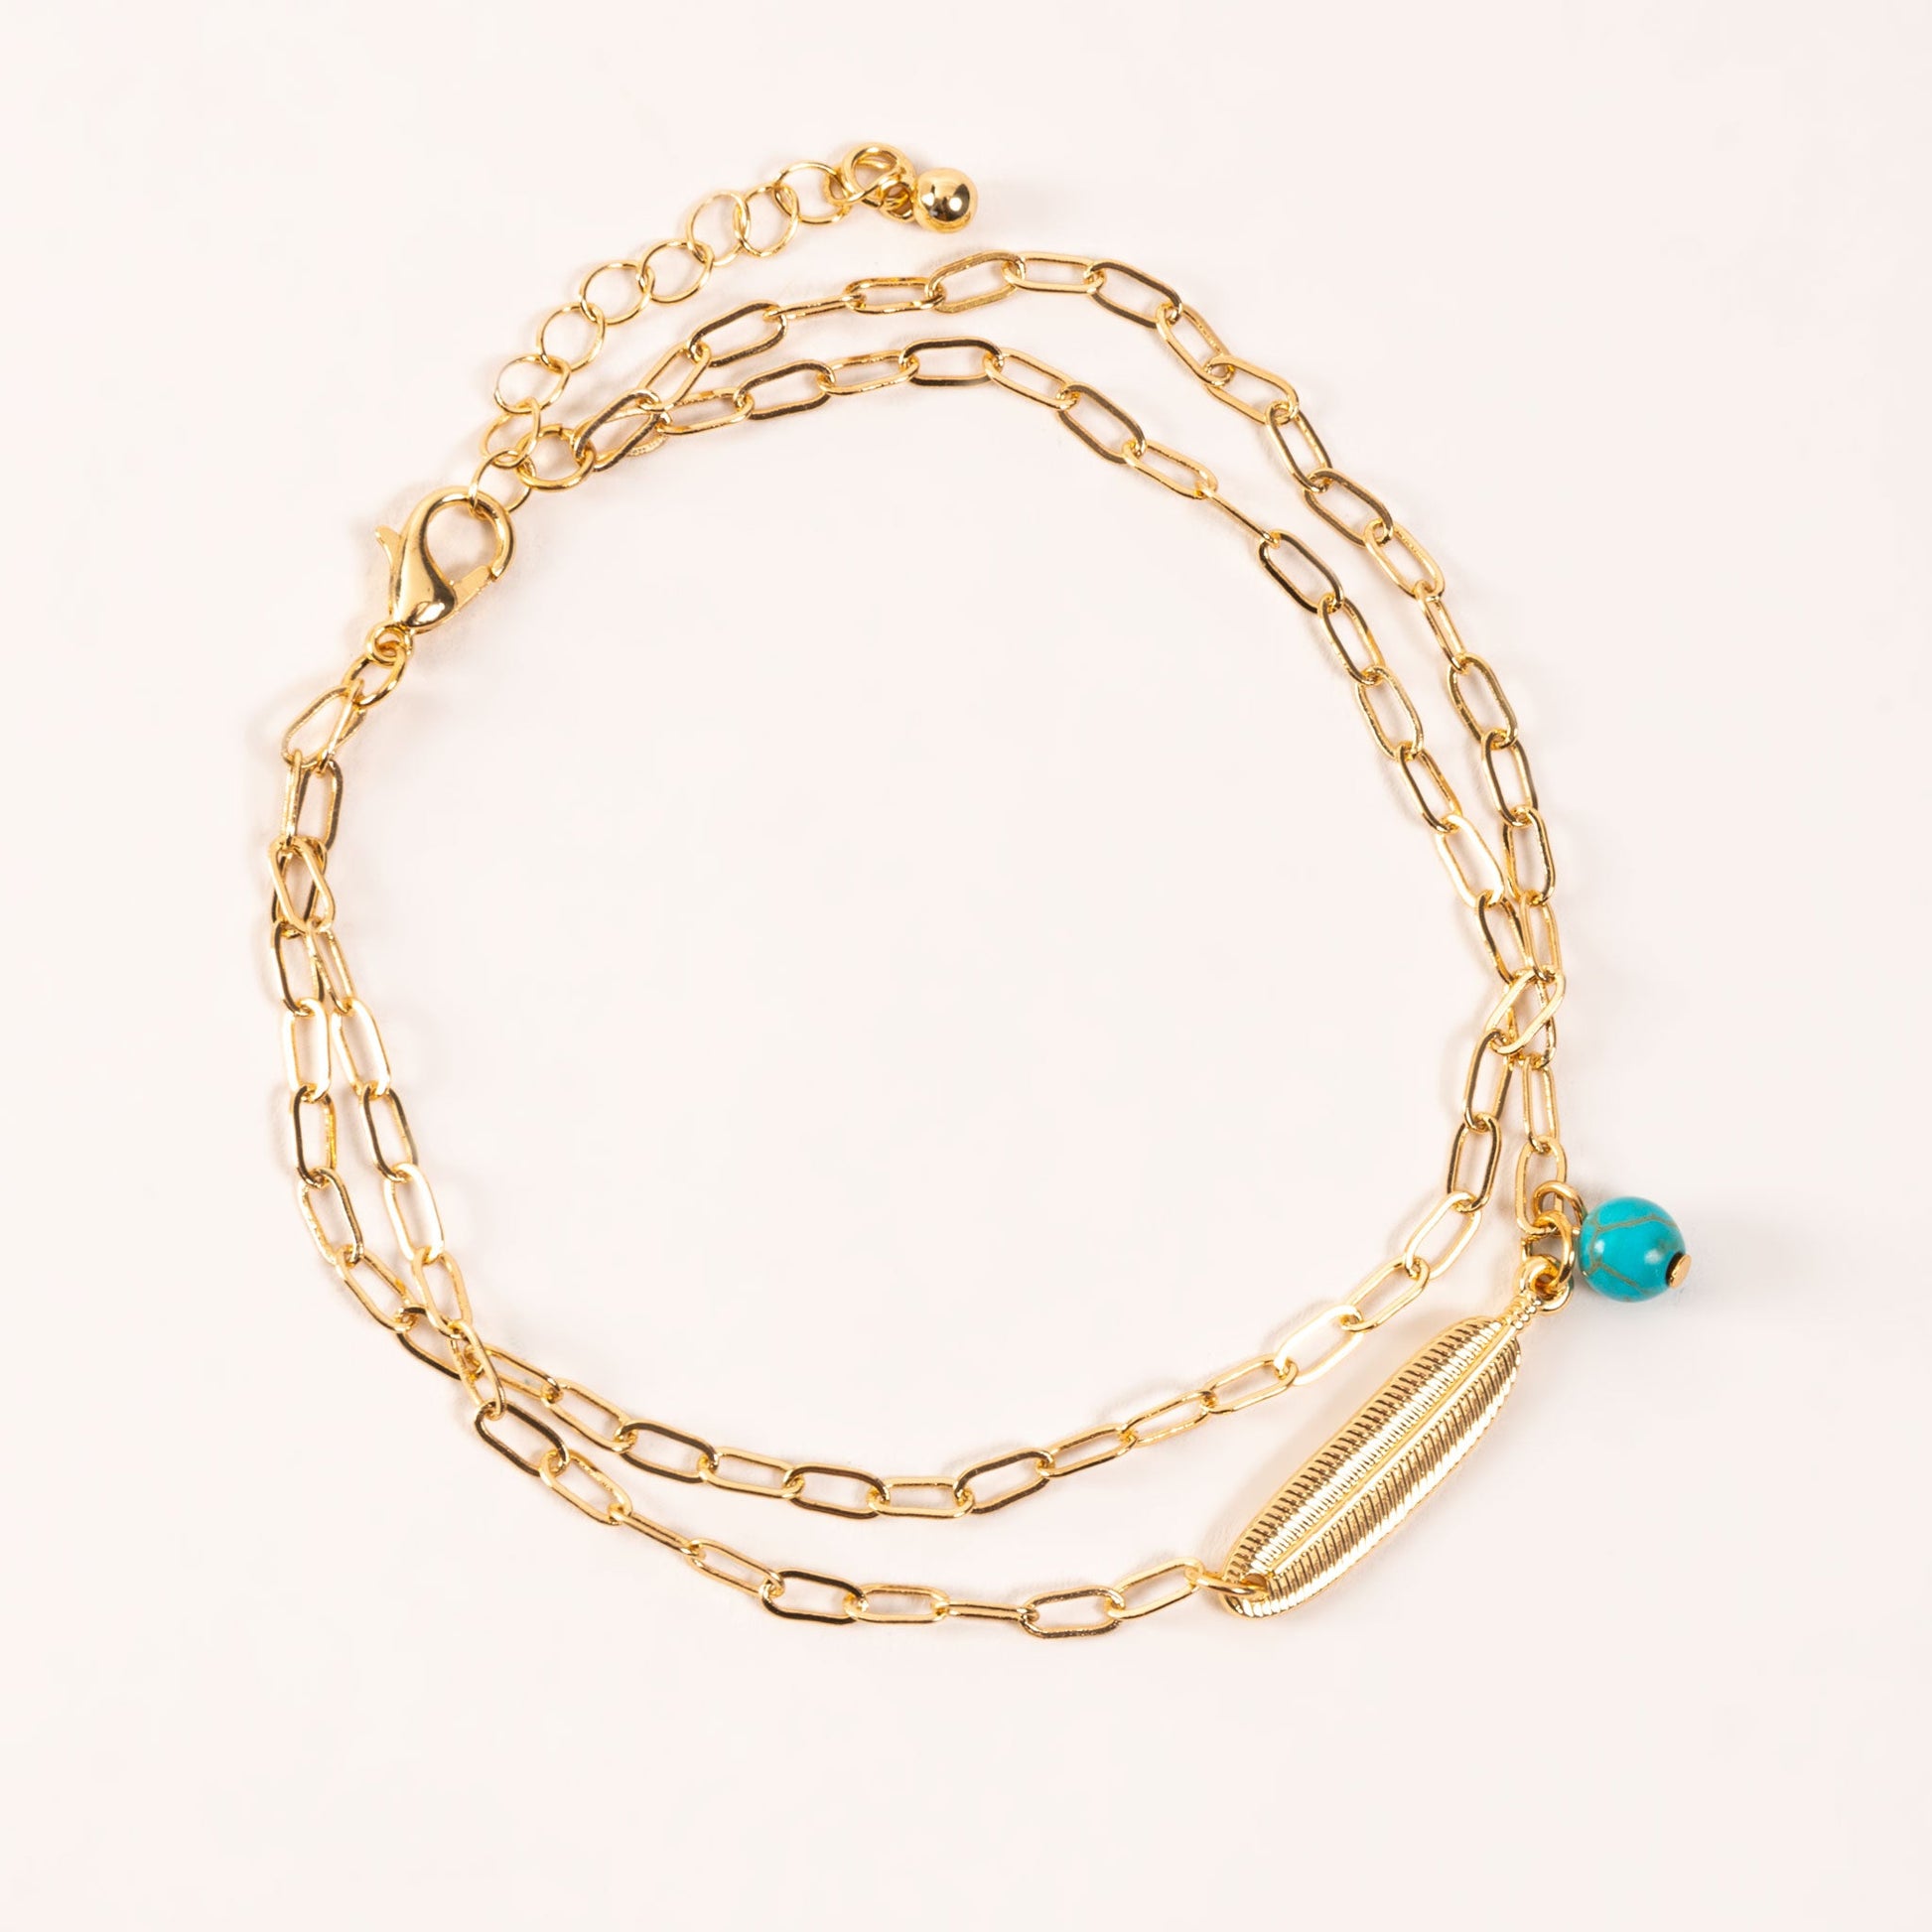 Elsie & Zoey Alexis Feather Charm Anklet